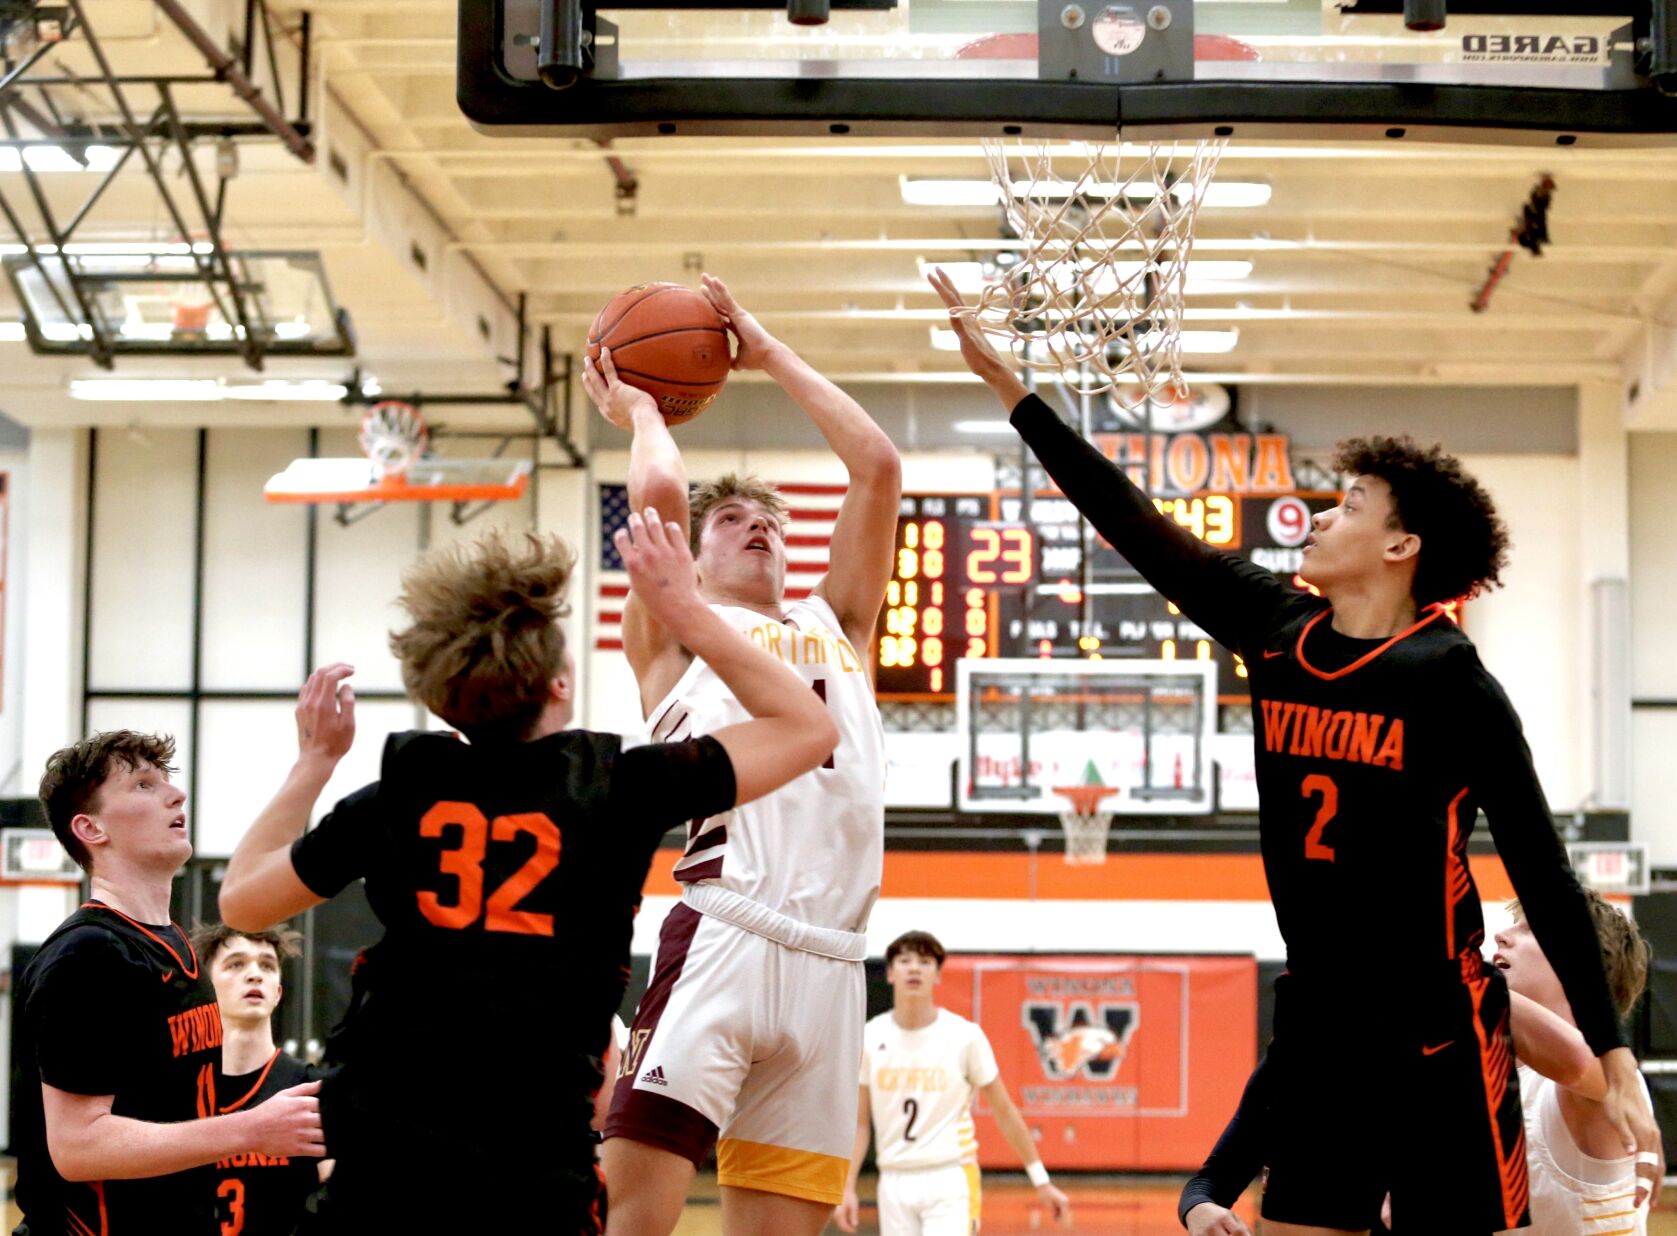 High School Sports Roundup: Winona Basketball Suffers Grueling Home Defeat, Cotter Bounces Back, and Winona Hockey Continues Winning Streak